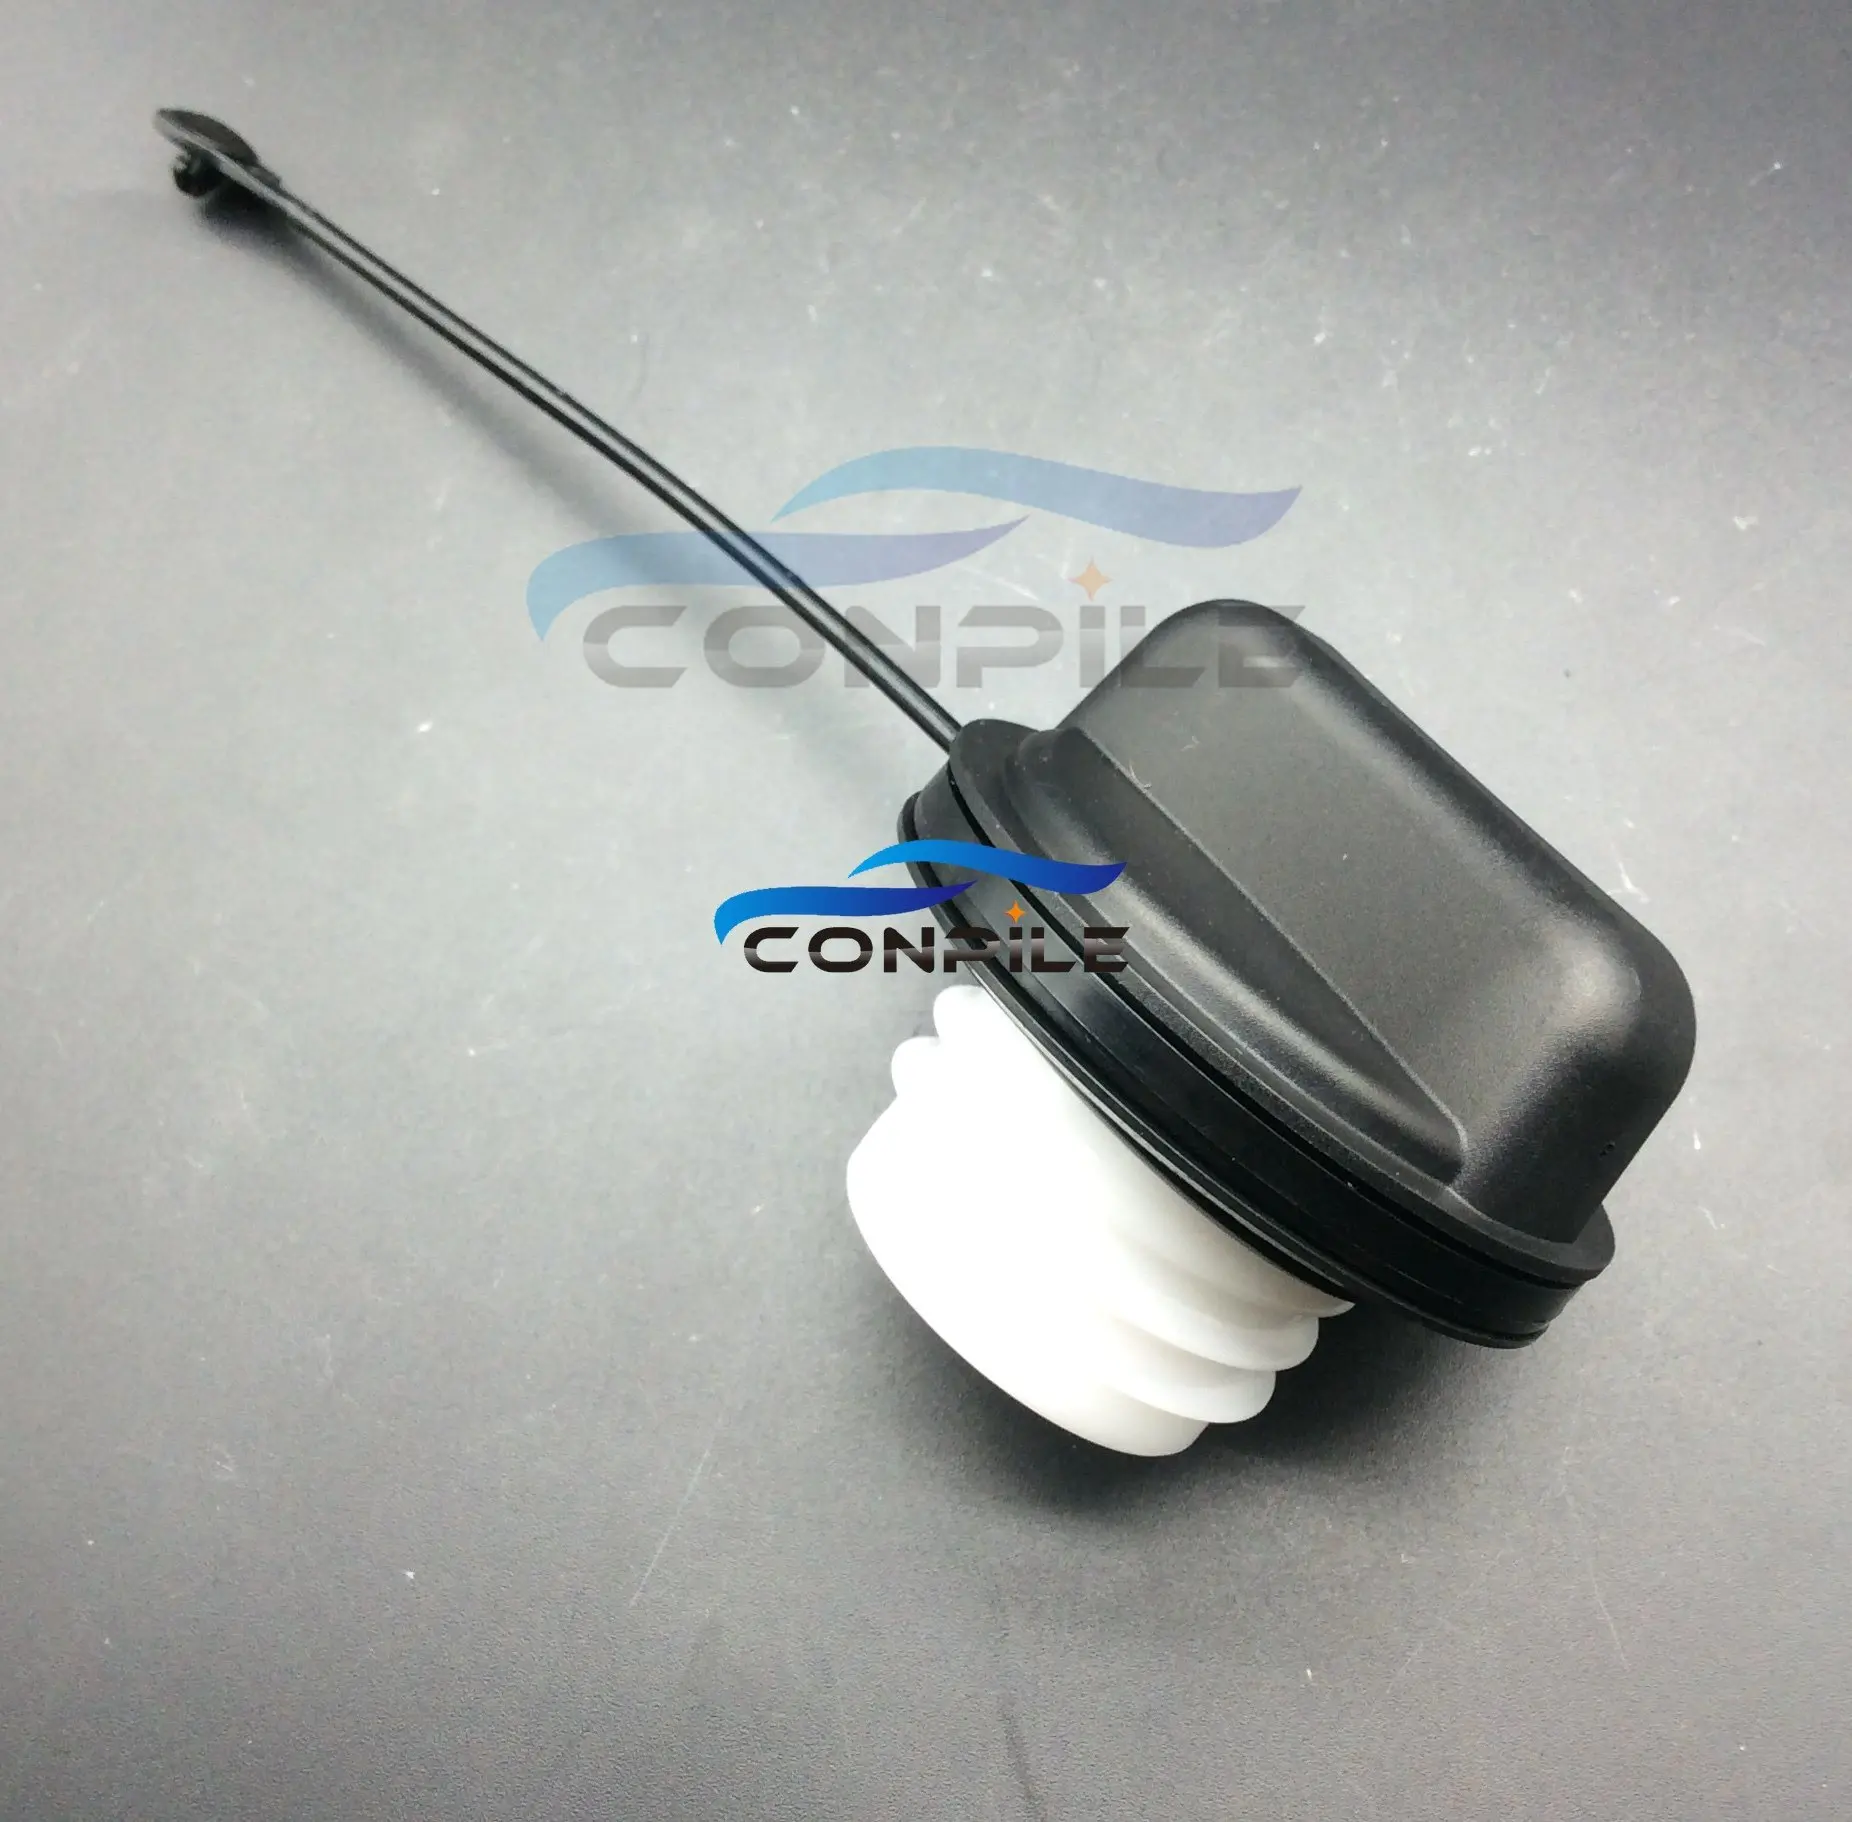 

for Nissan Tiida Livina geniss Sylphy Qashqai x-trail Teana Sunny Fuel tank inner cover with gasoline 9cm cap rope